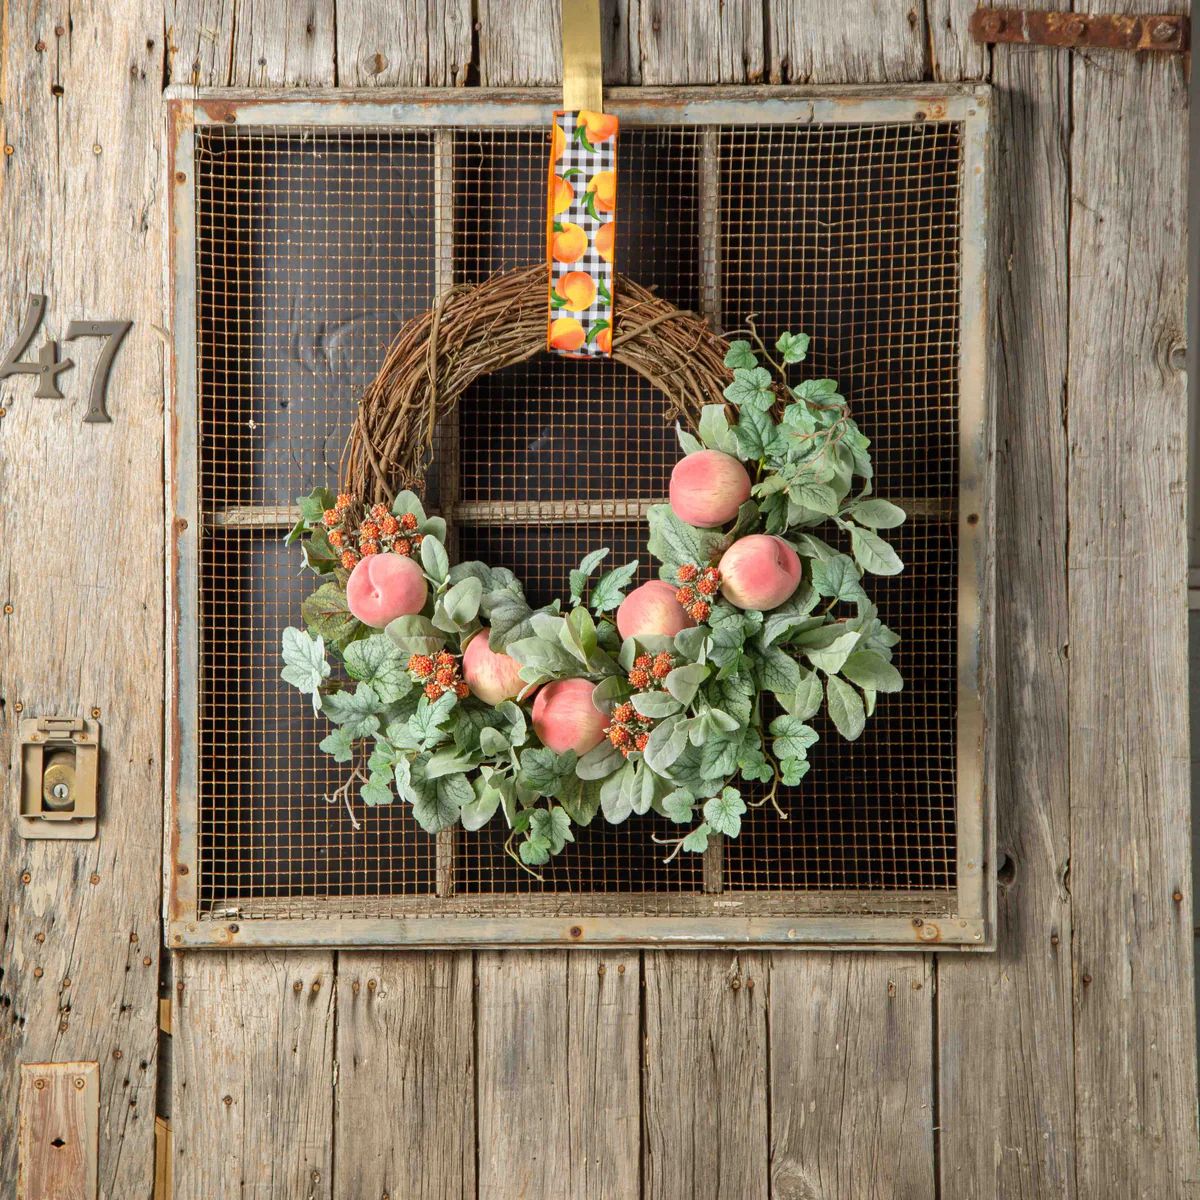 Georgia Peach - Lamb's Ear, Frosted Ivy, Fuzzy Peach with Gingham Ribbon Hanger Spring Summer Doo... | Darby Creek Trading